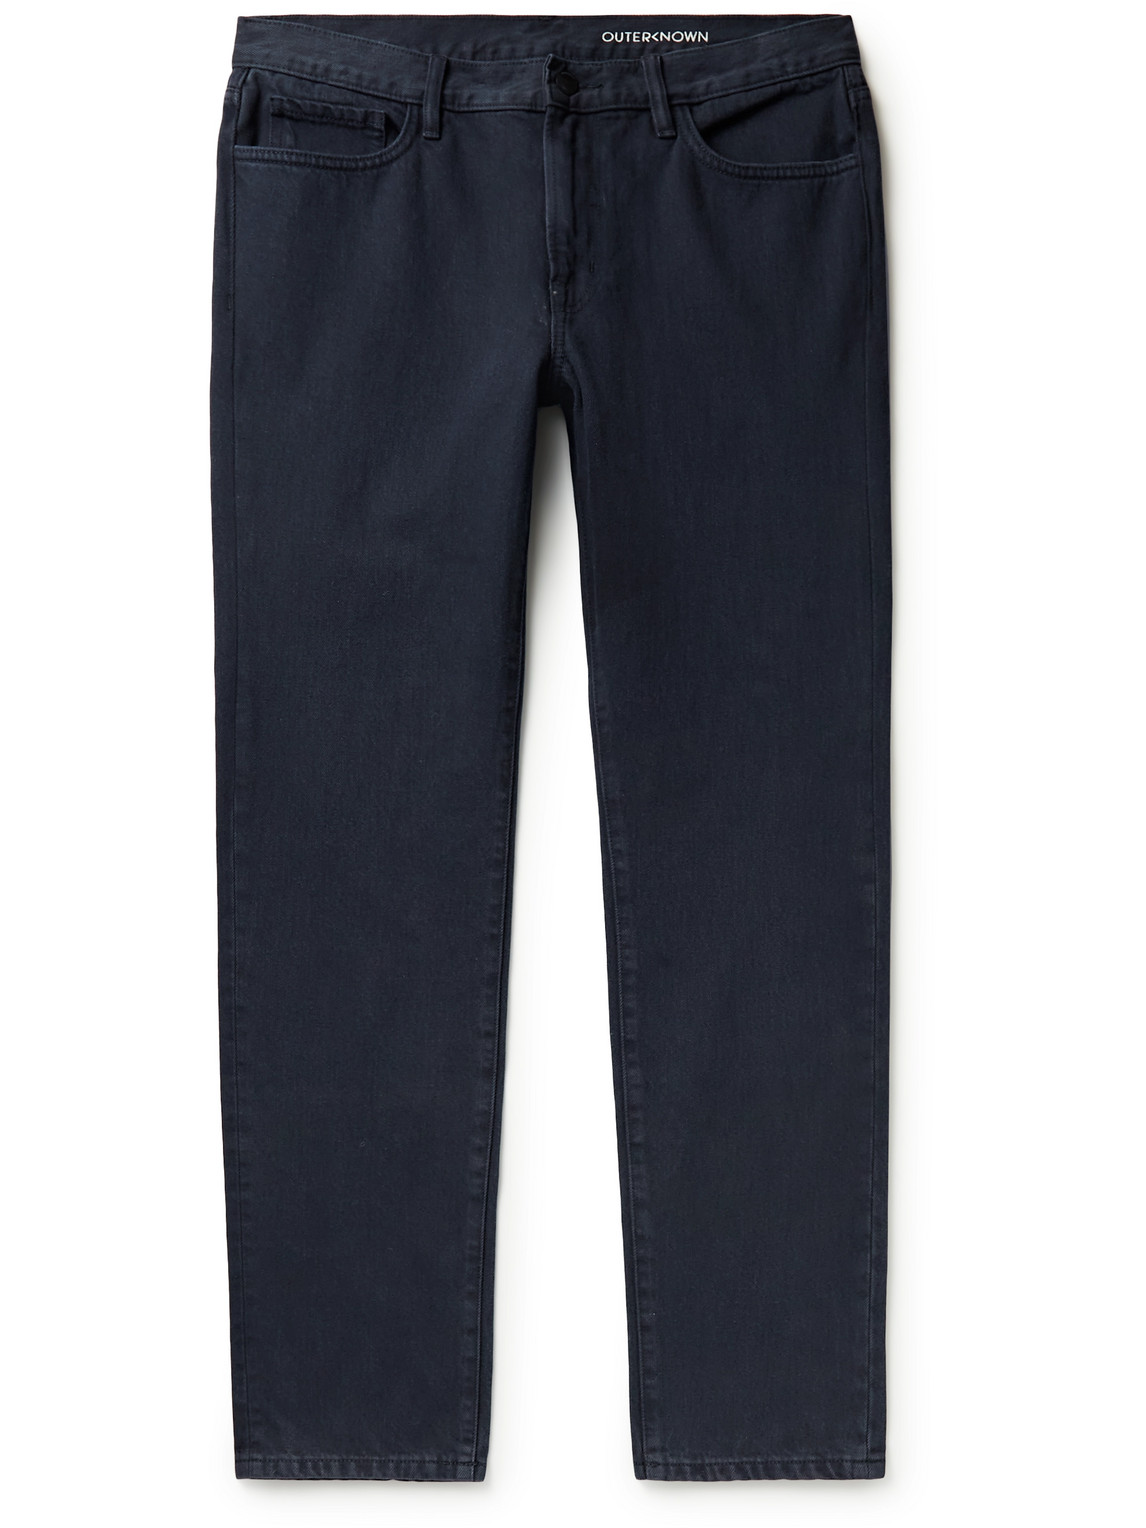 Outerknown Drifter Tapered Organic Jeans In Blue